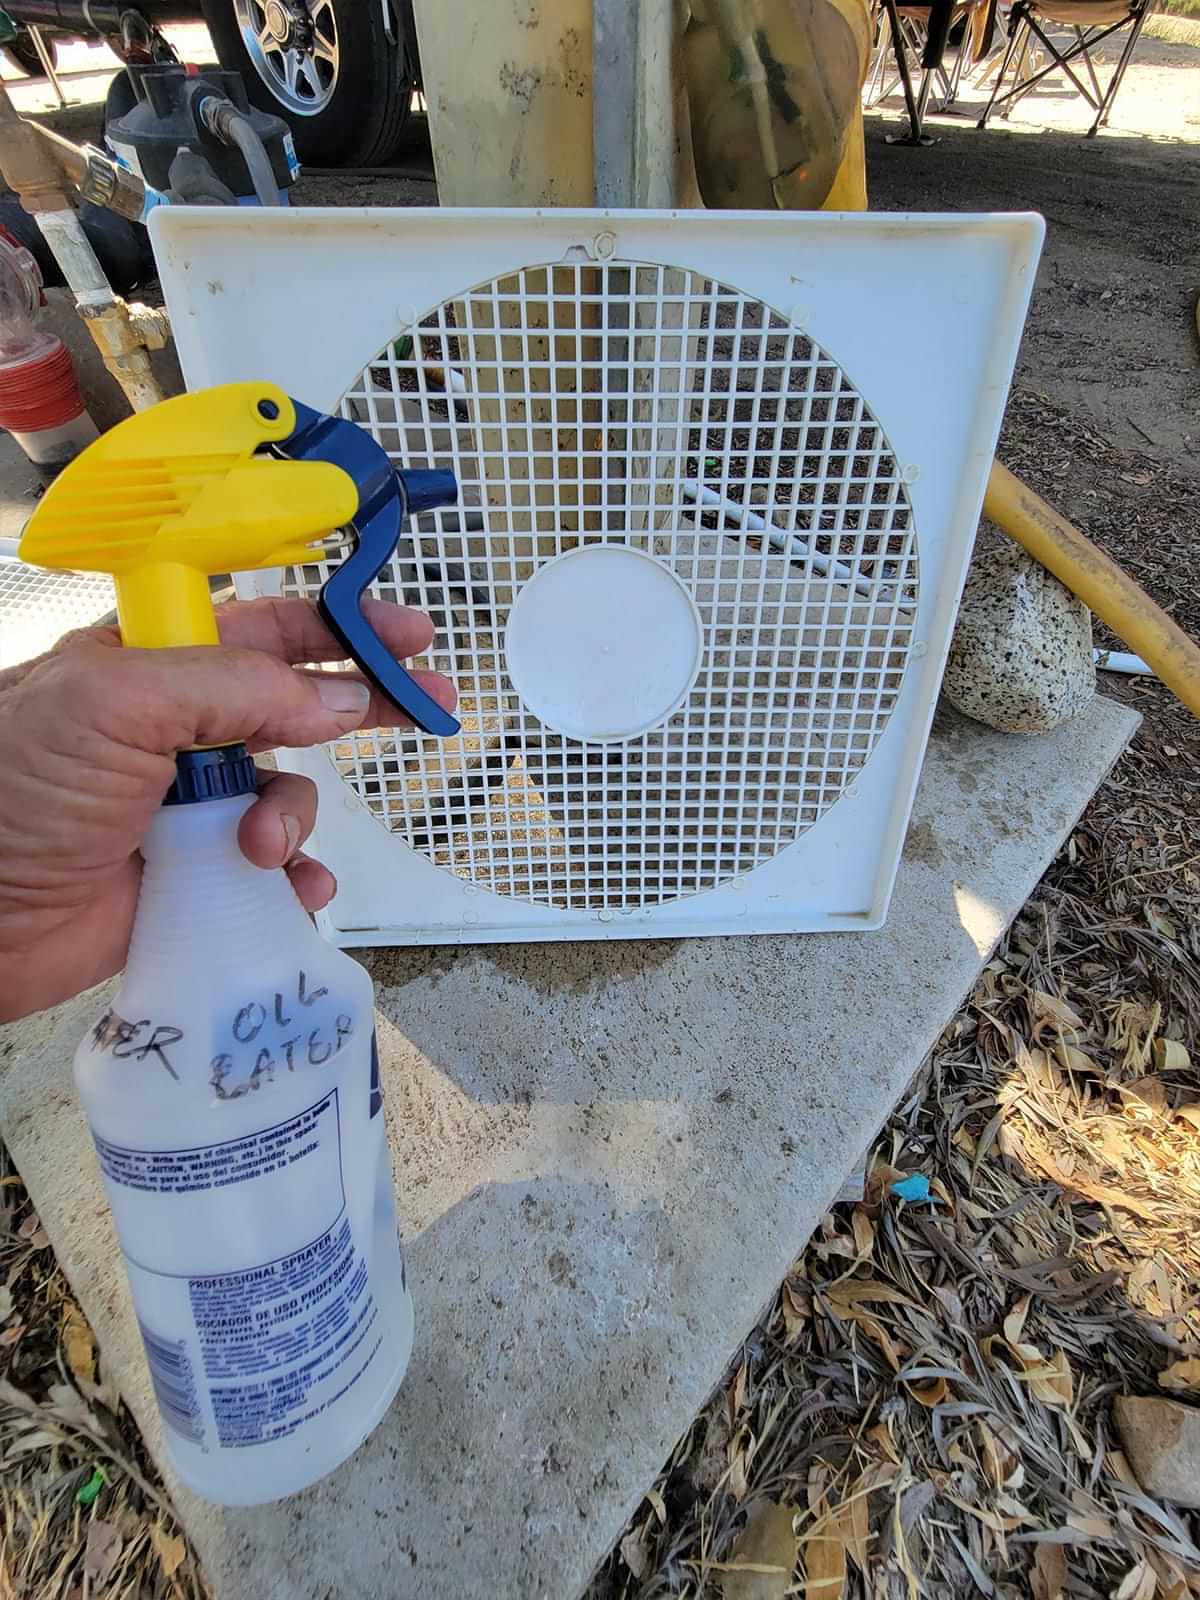 a hand holds a spray bottle in preparation to clean the fans blade protecting cover